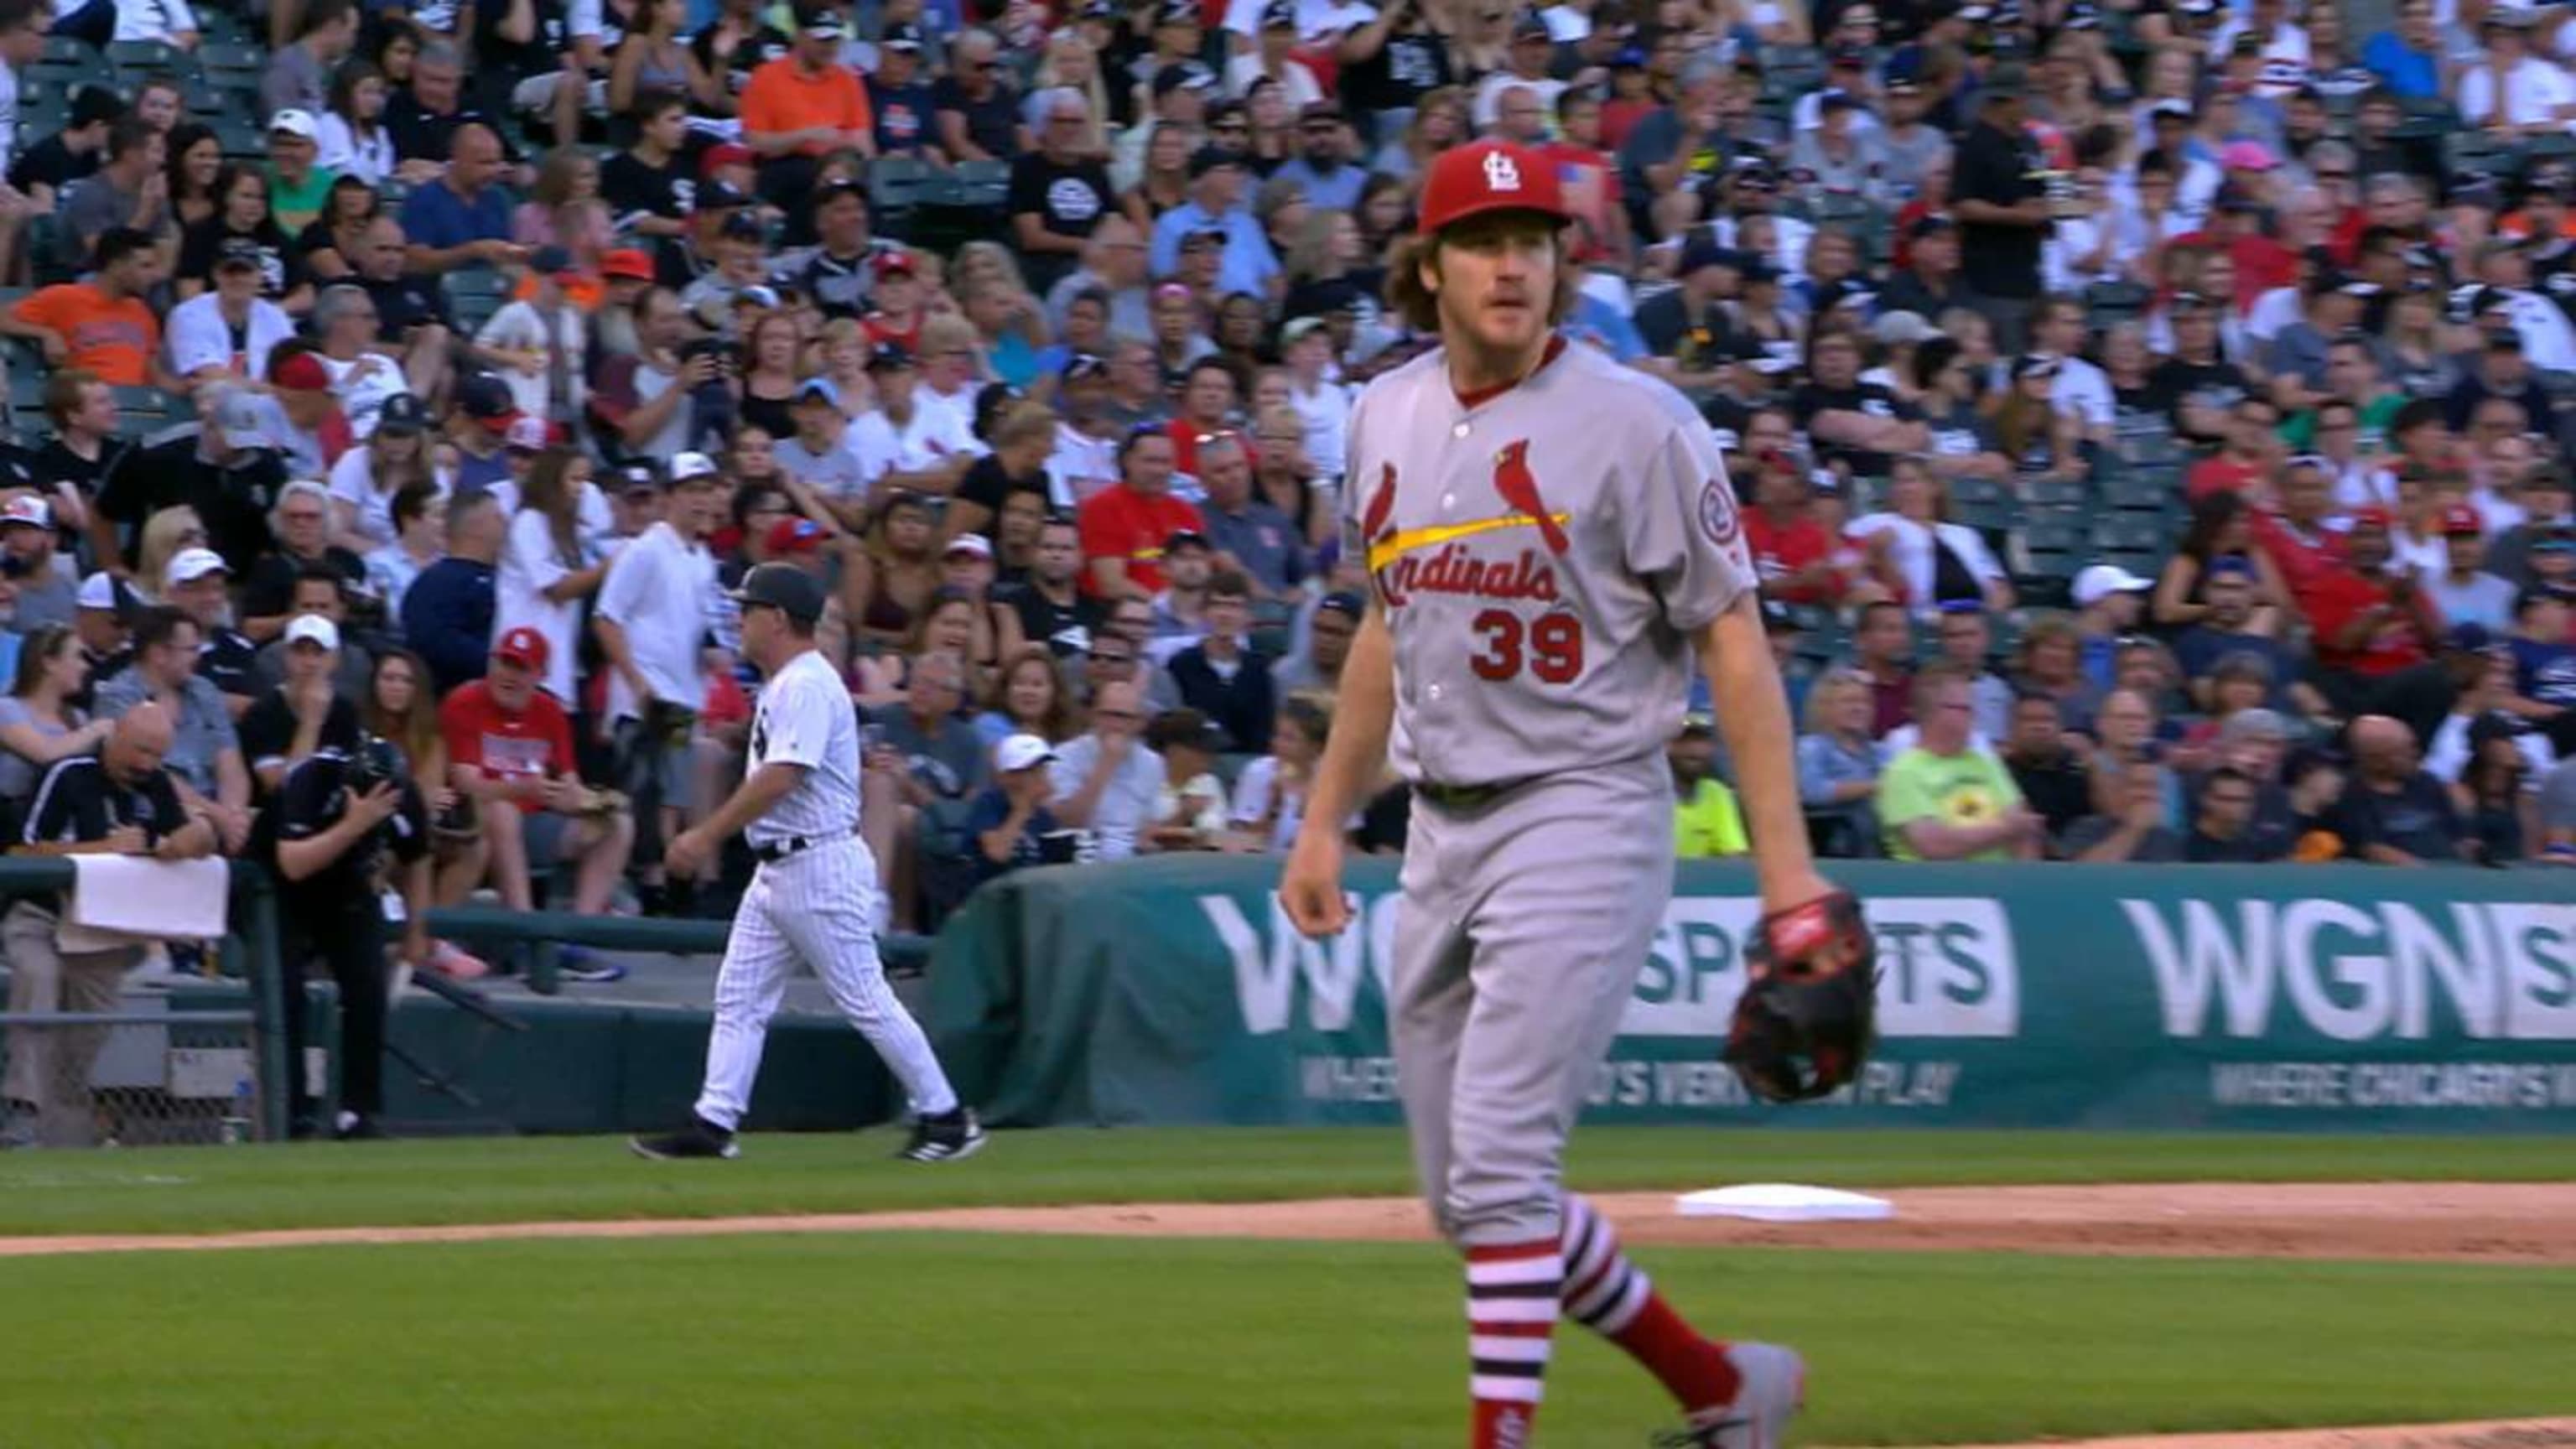 MLB) Miles Mikolas has been added to the NL All-Star team